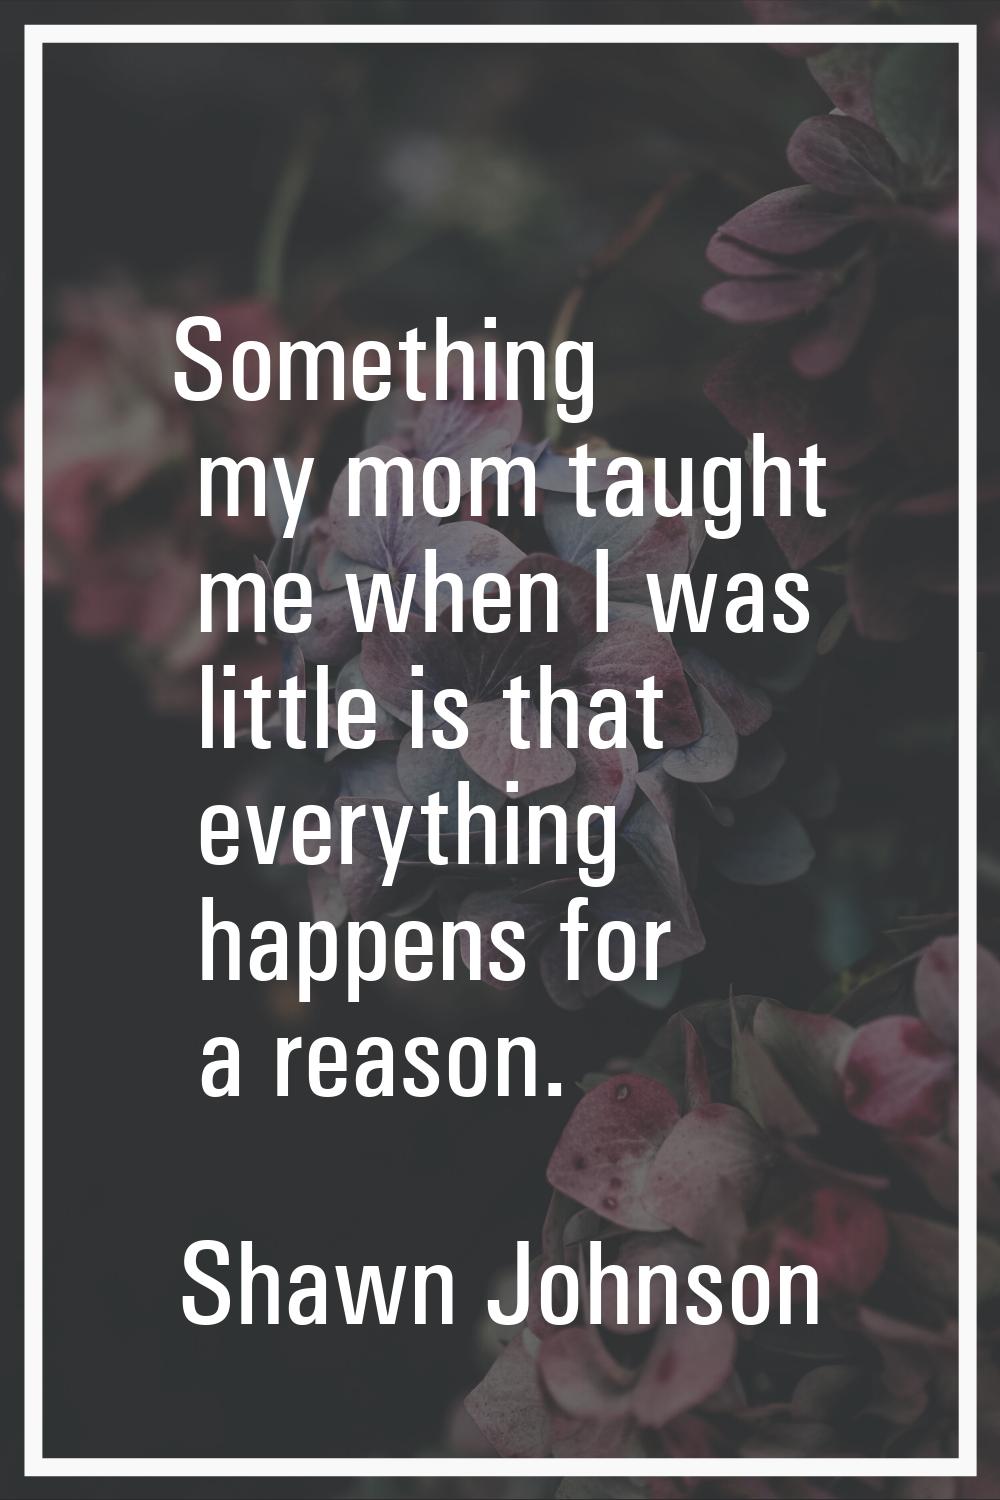 Something my mom taught me when I was little is that everything happens for a reason.